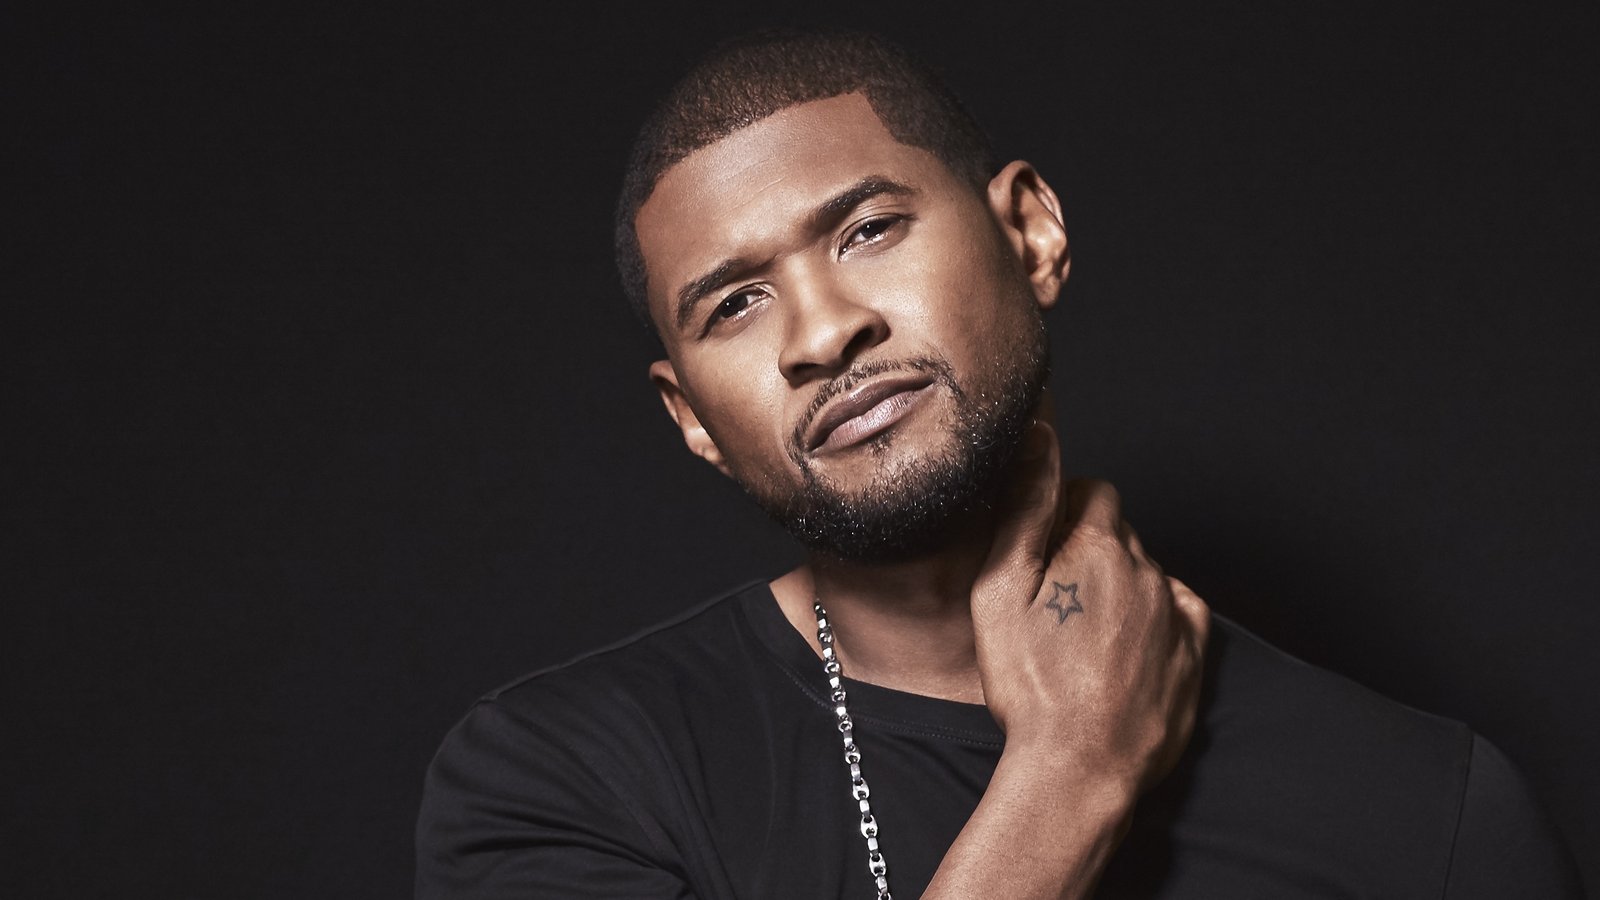 Usher’s Hit Single “Yeah!” Almost Didn’t Happen, Says Rico Love